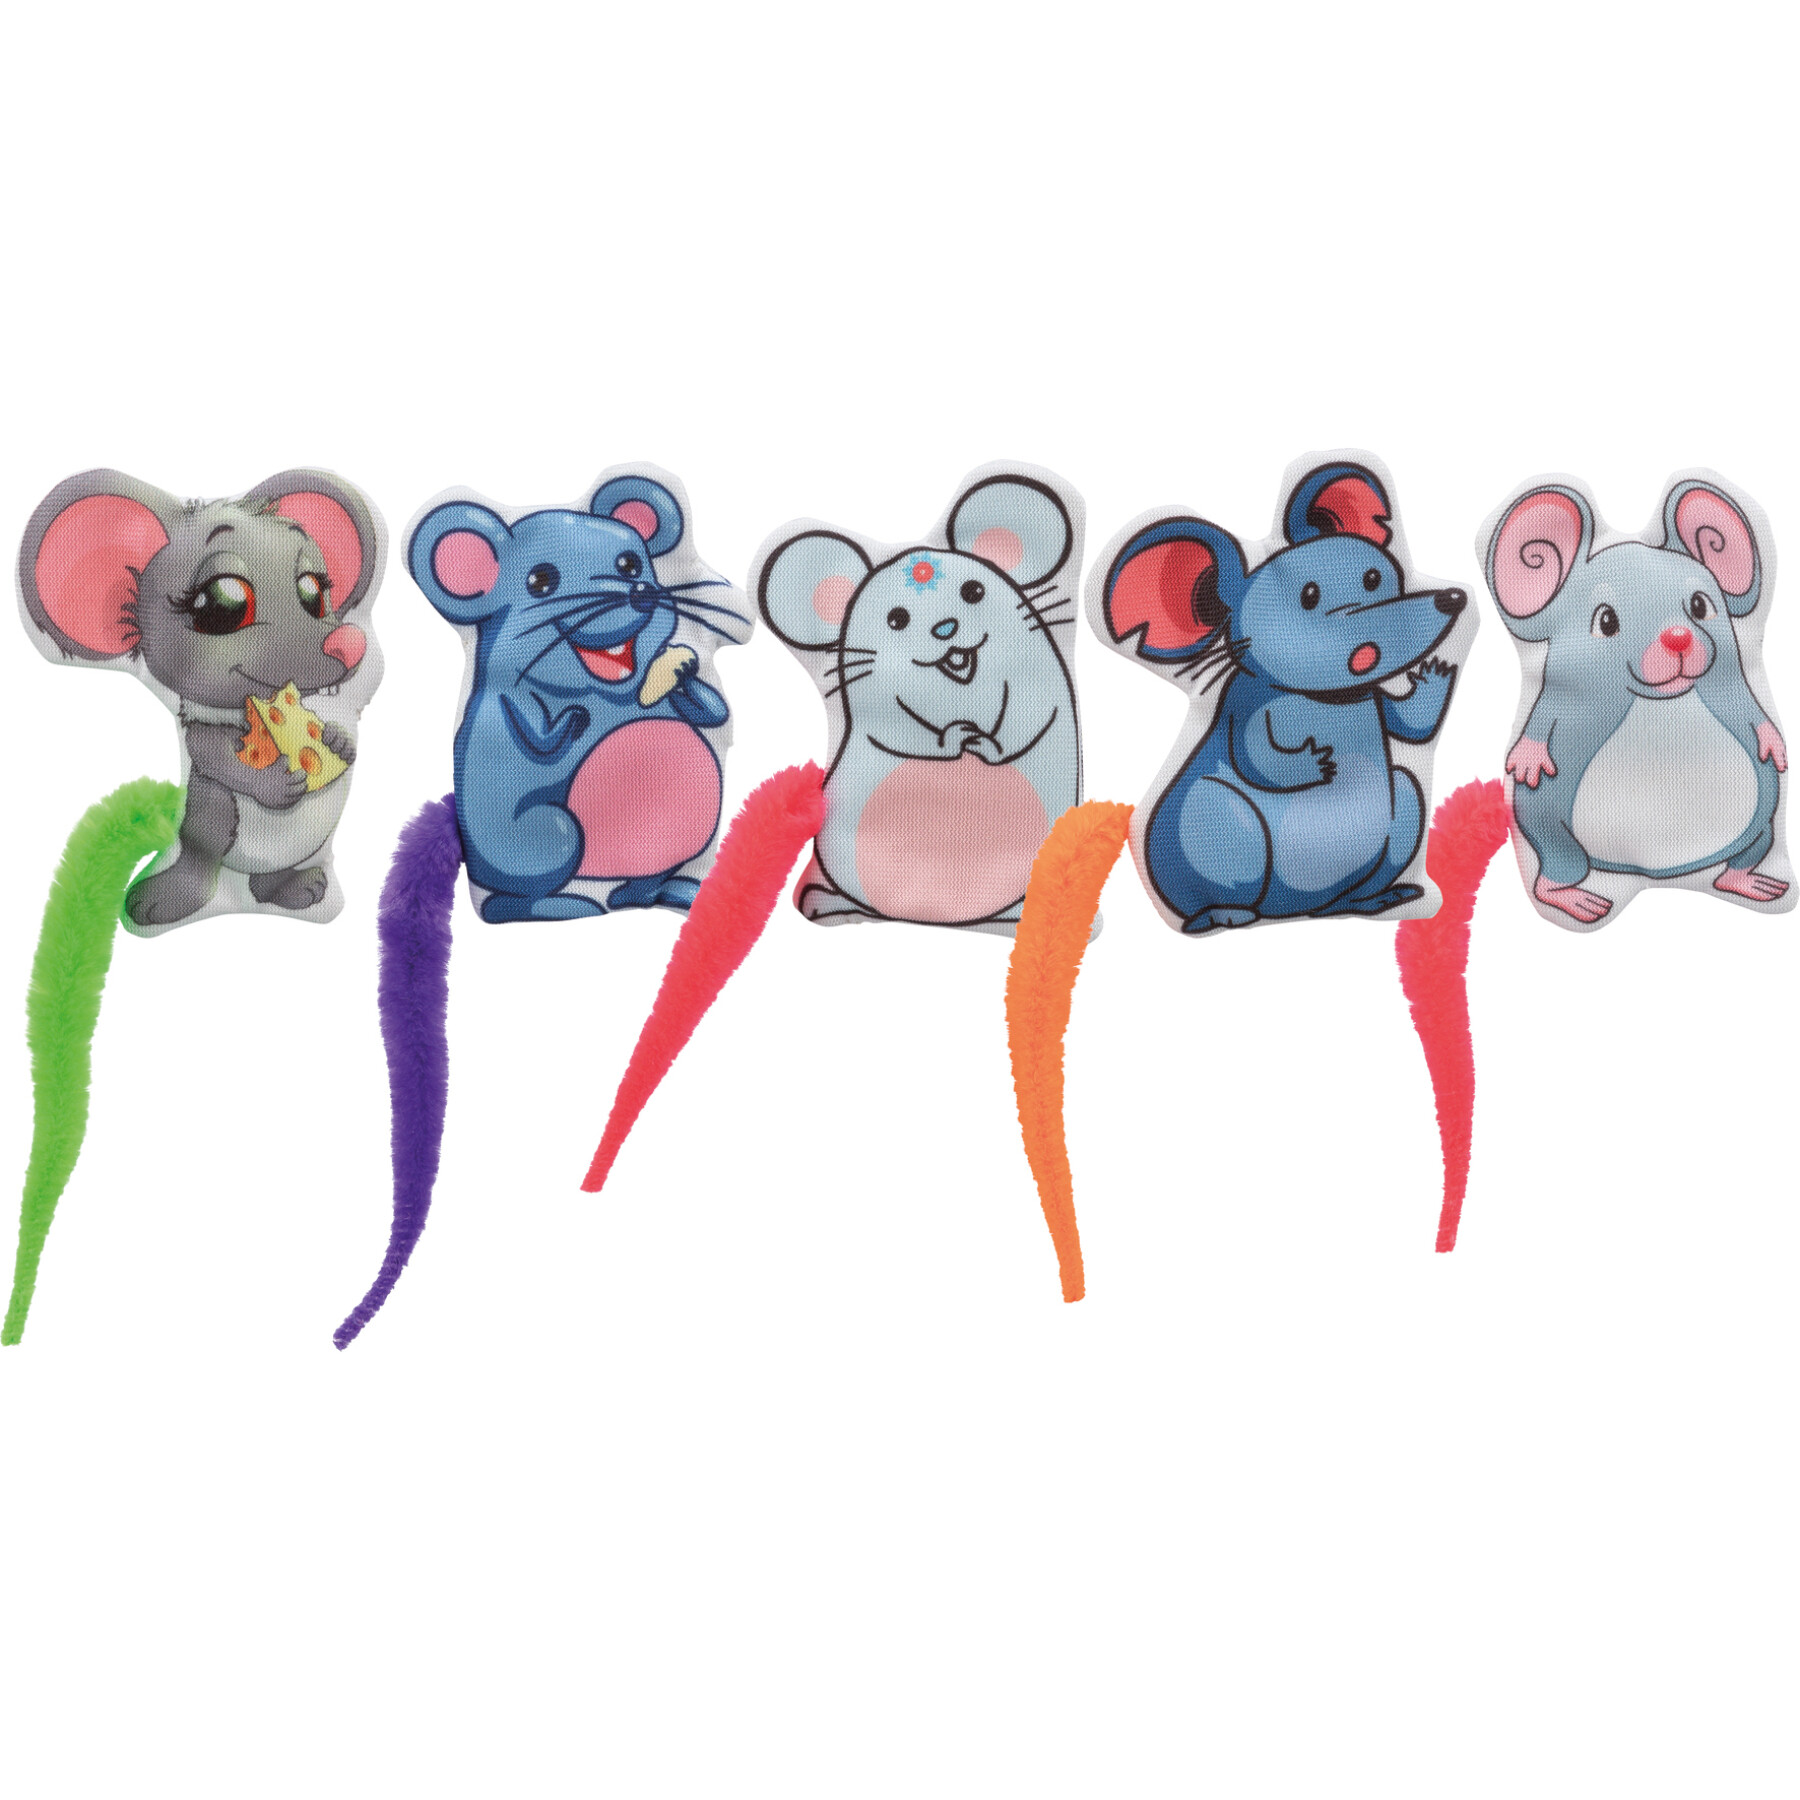 Plush toy for cats and mice Trixie (x110)